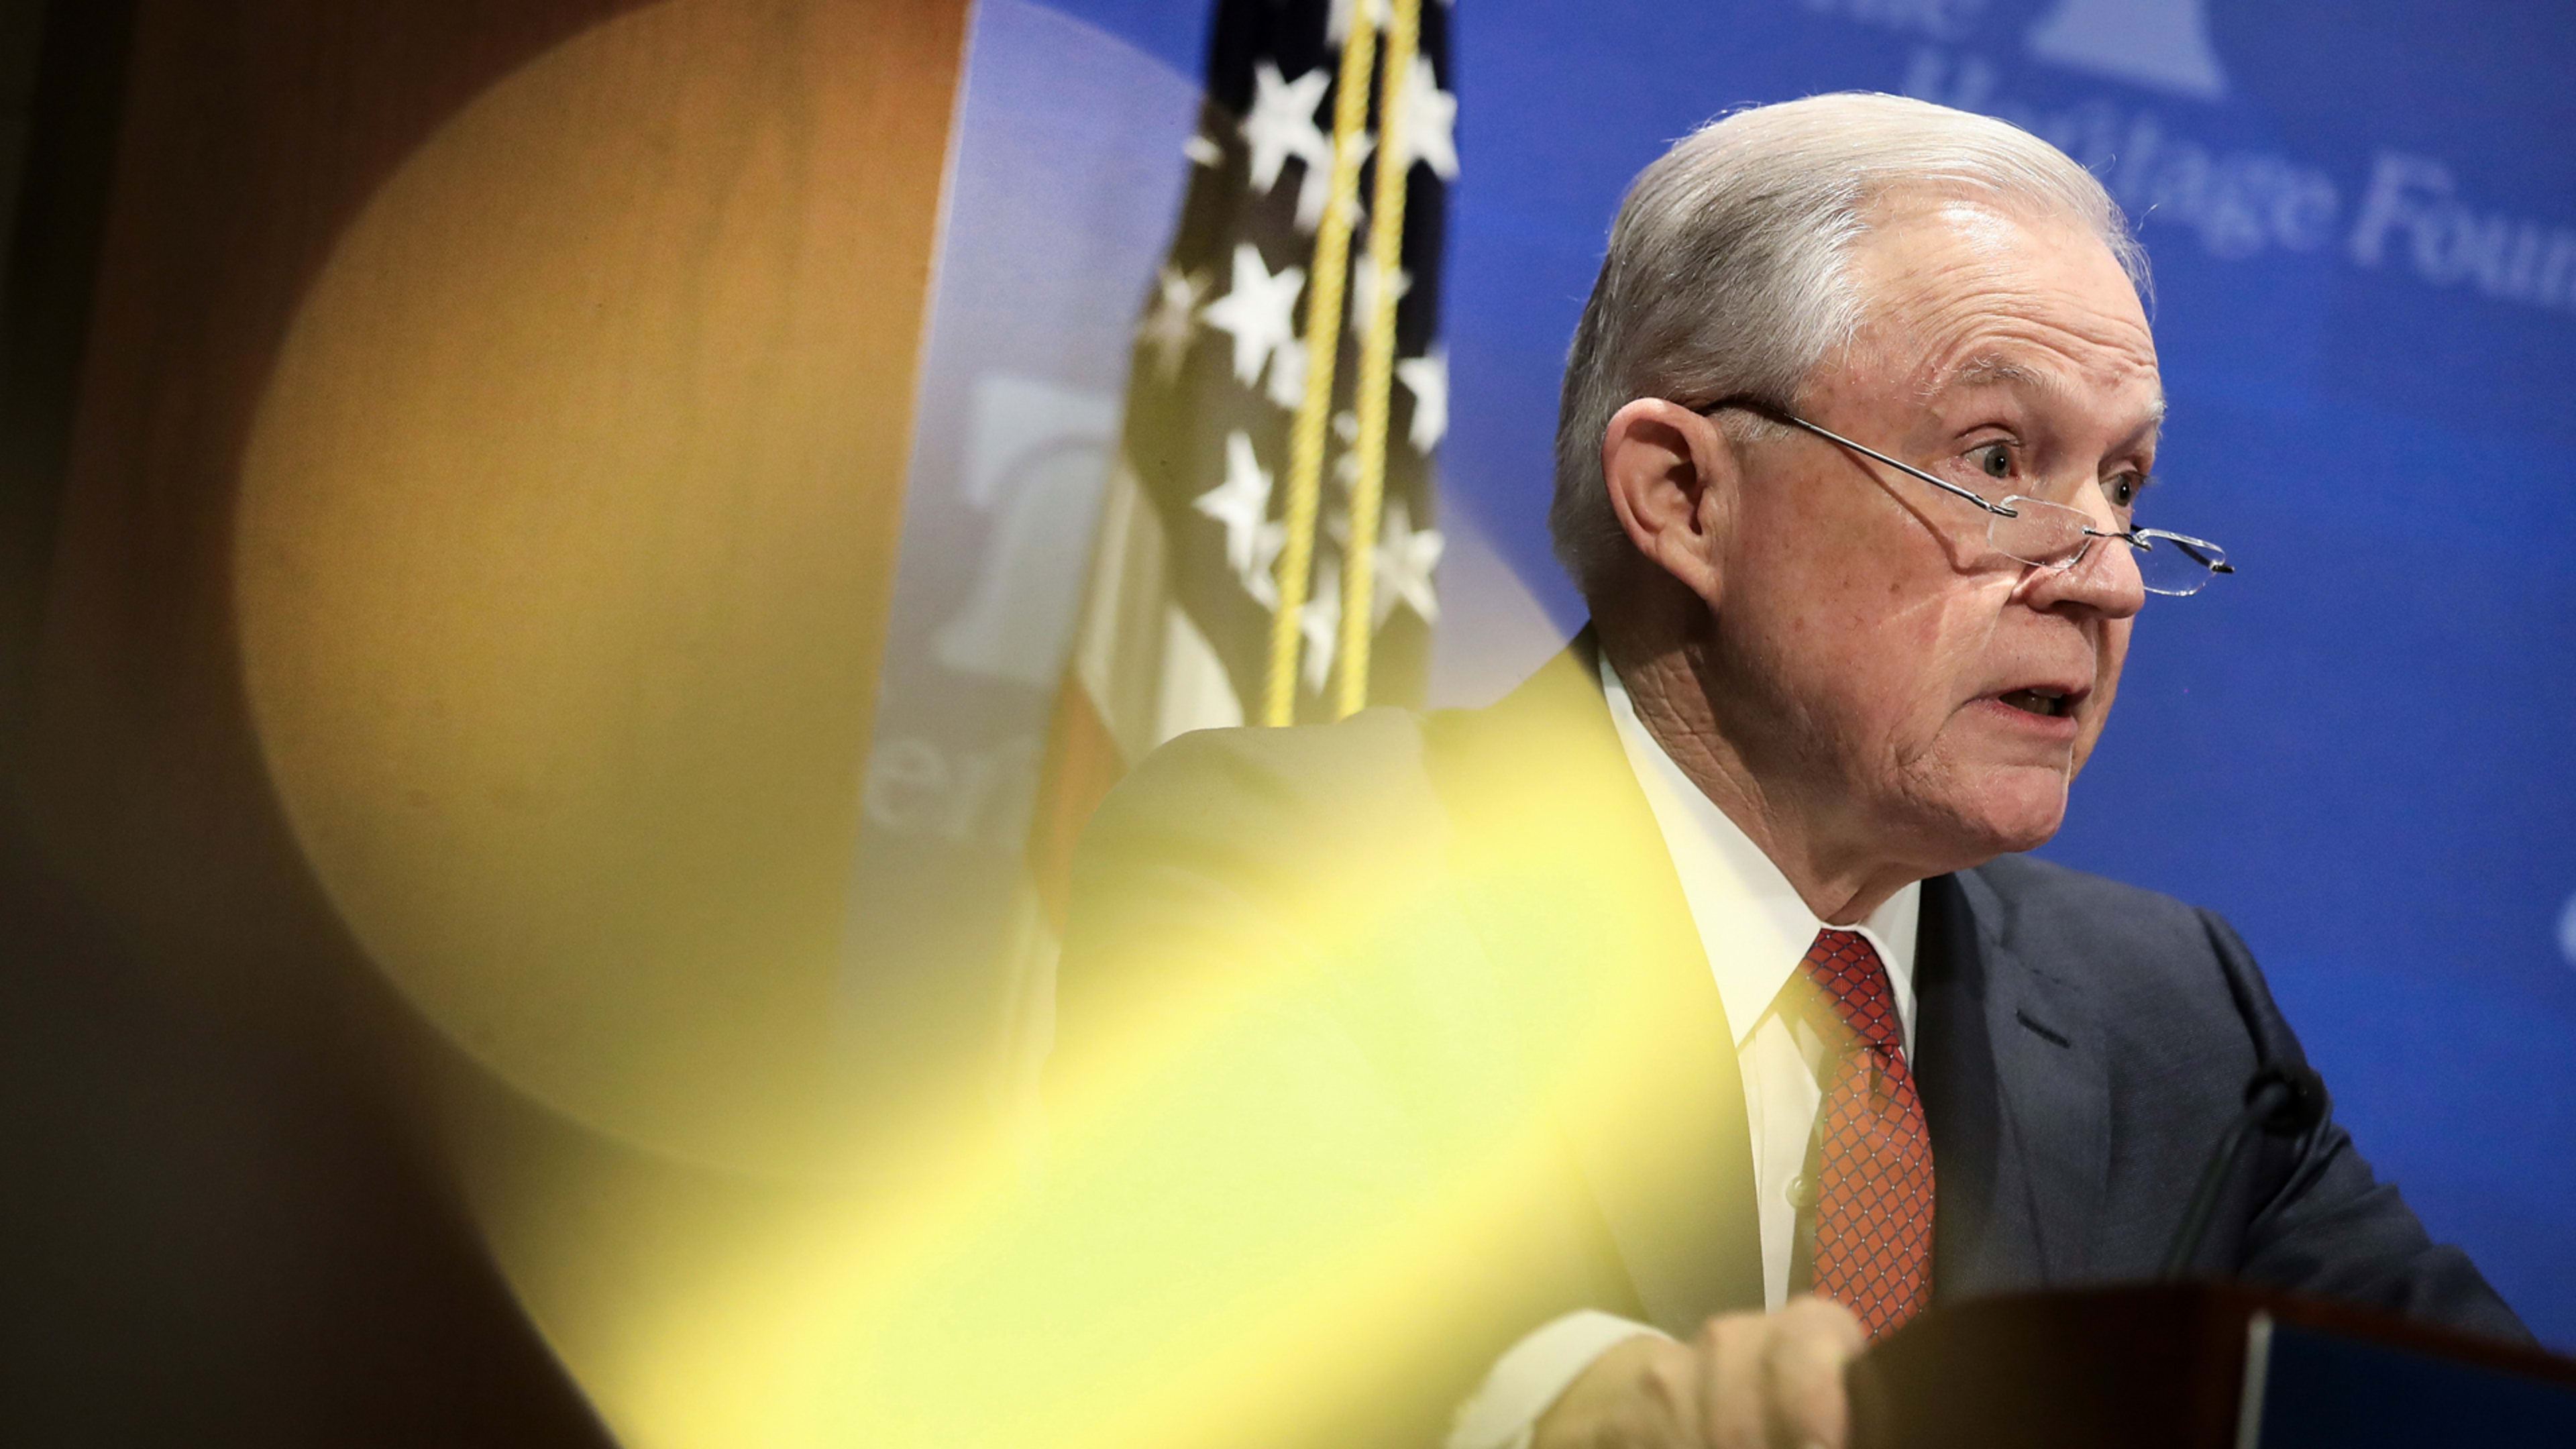 Jeff Sessions testimony: How to watch the House Judiciary Committee hearing live